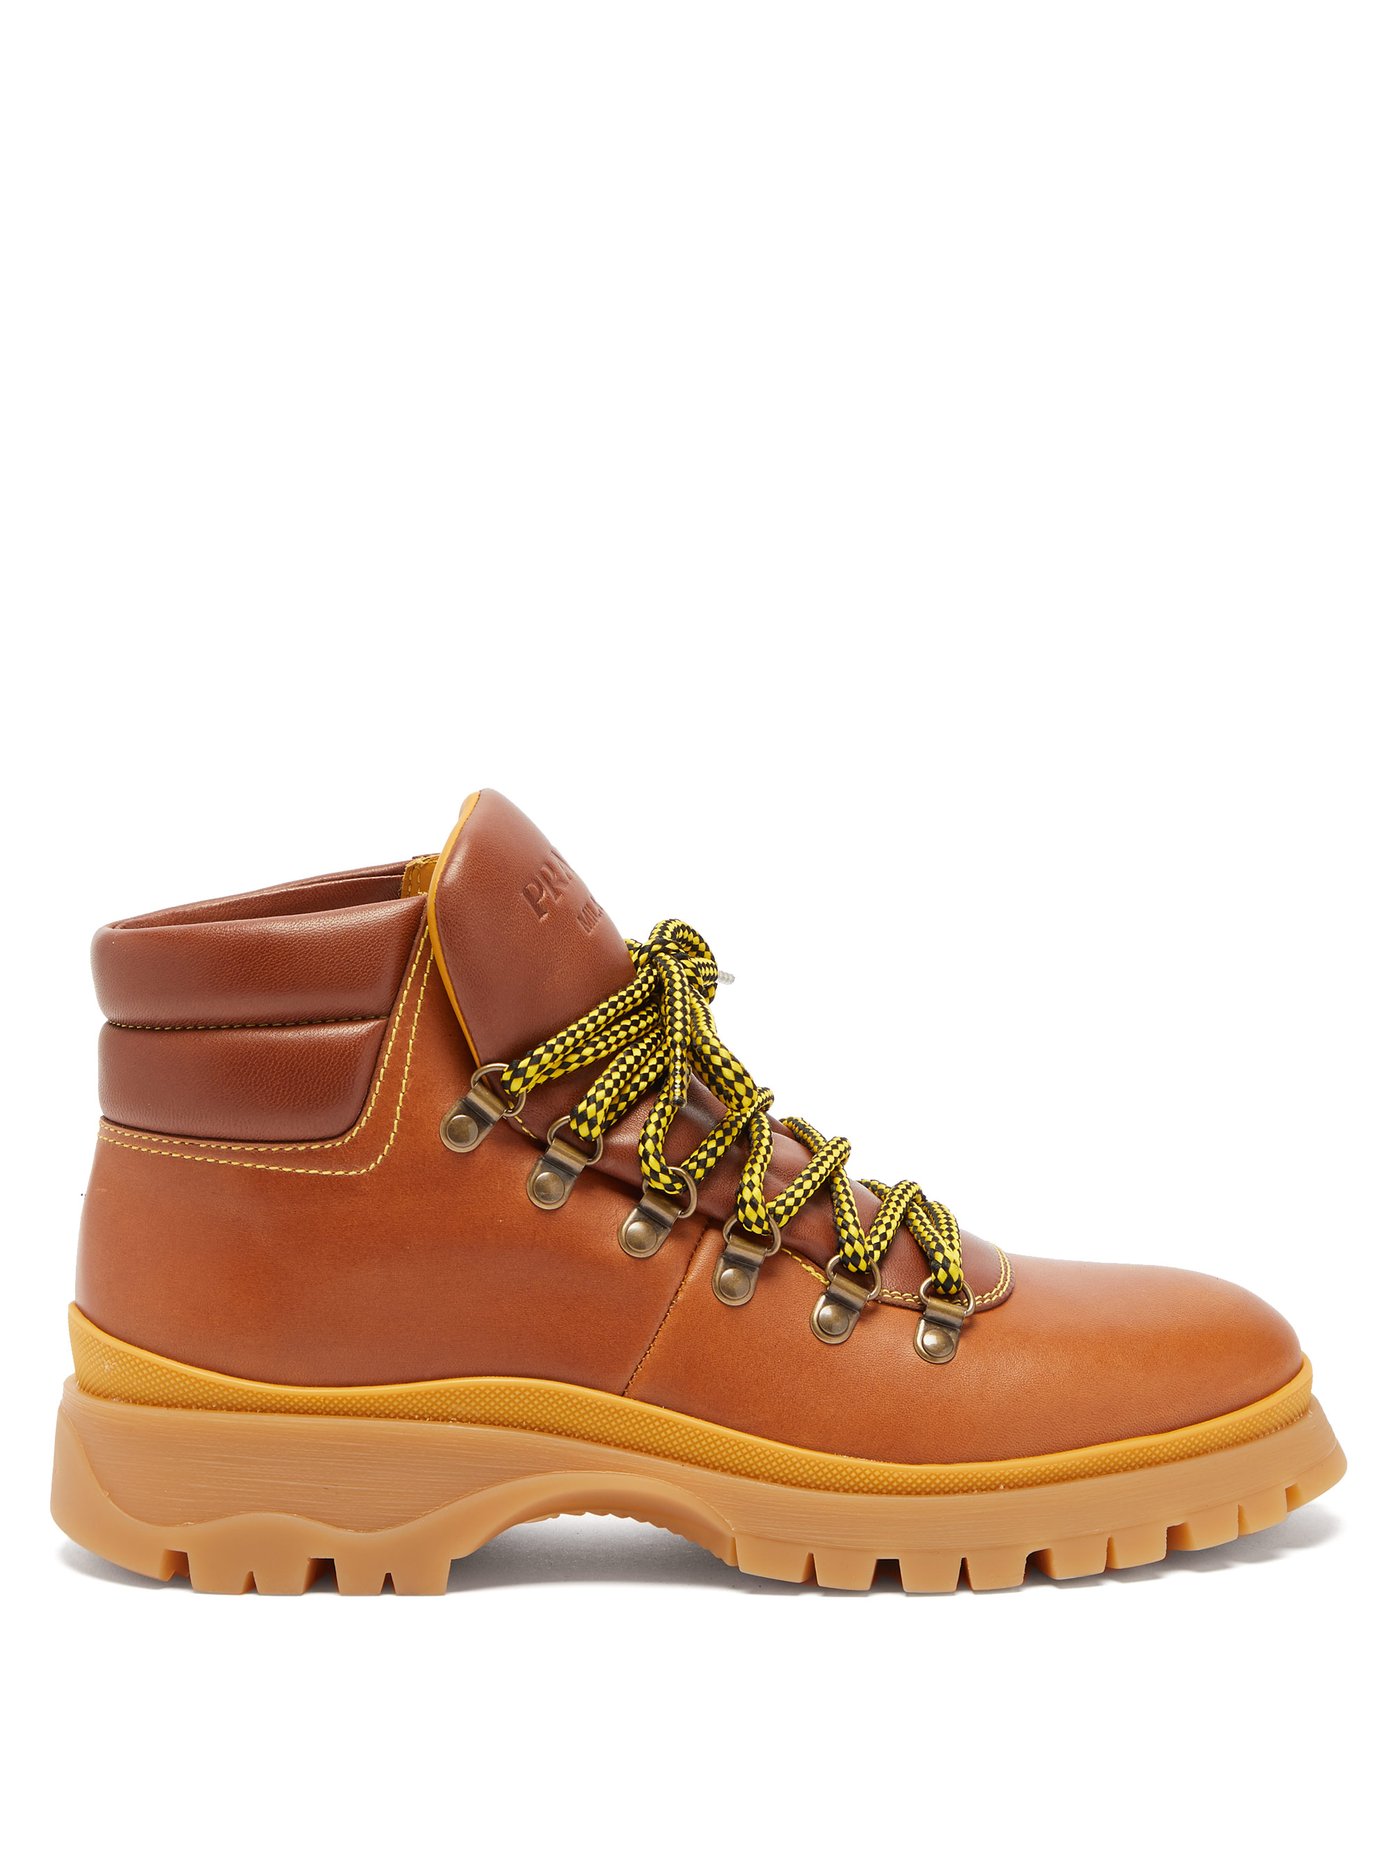 tan leather hiking boots